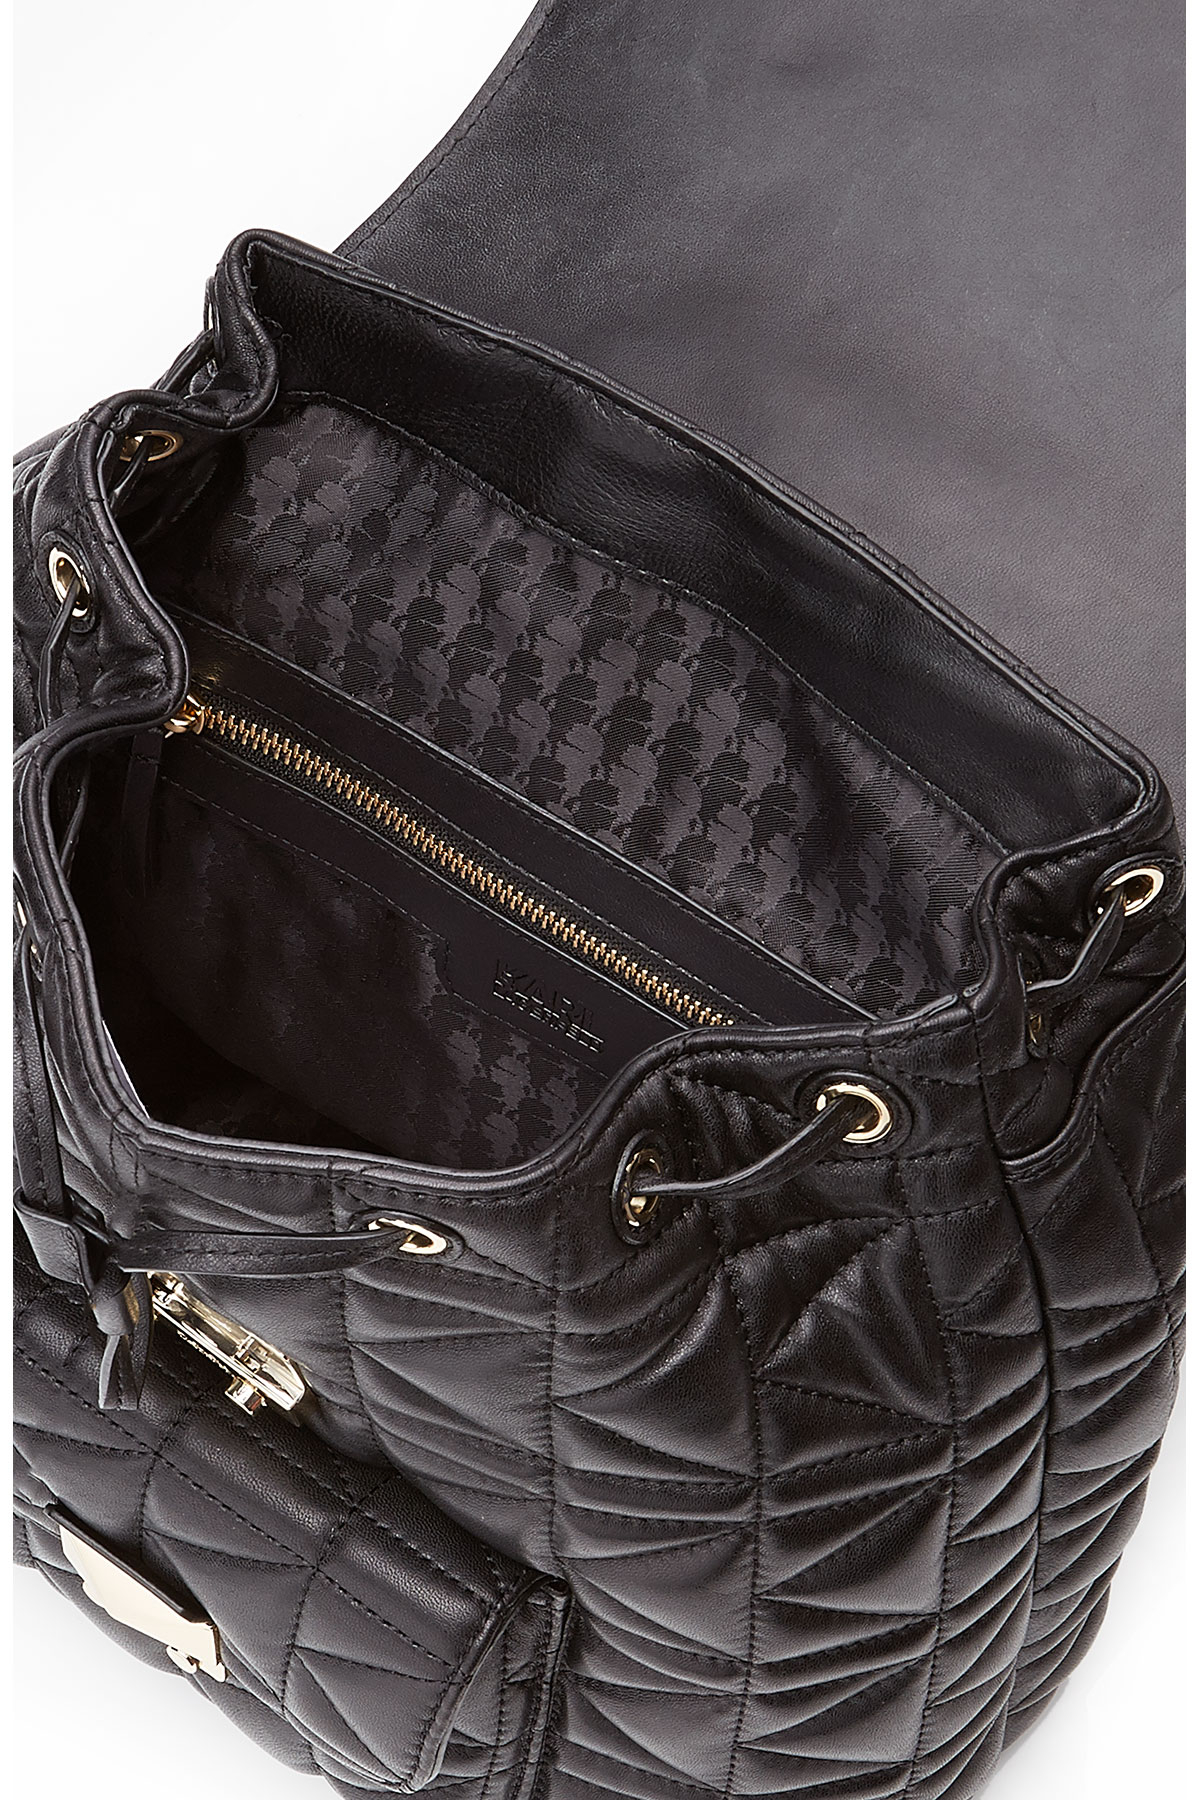 Lyst - Karl Lagerfeld Quilted Leather Backpack in Black